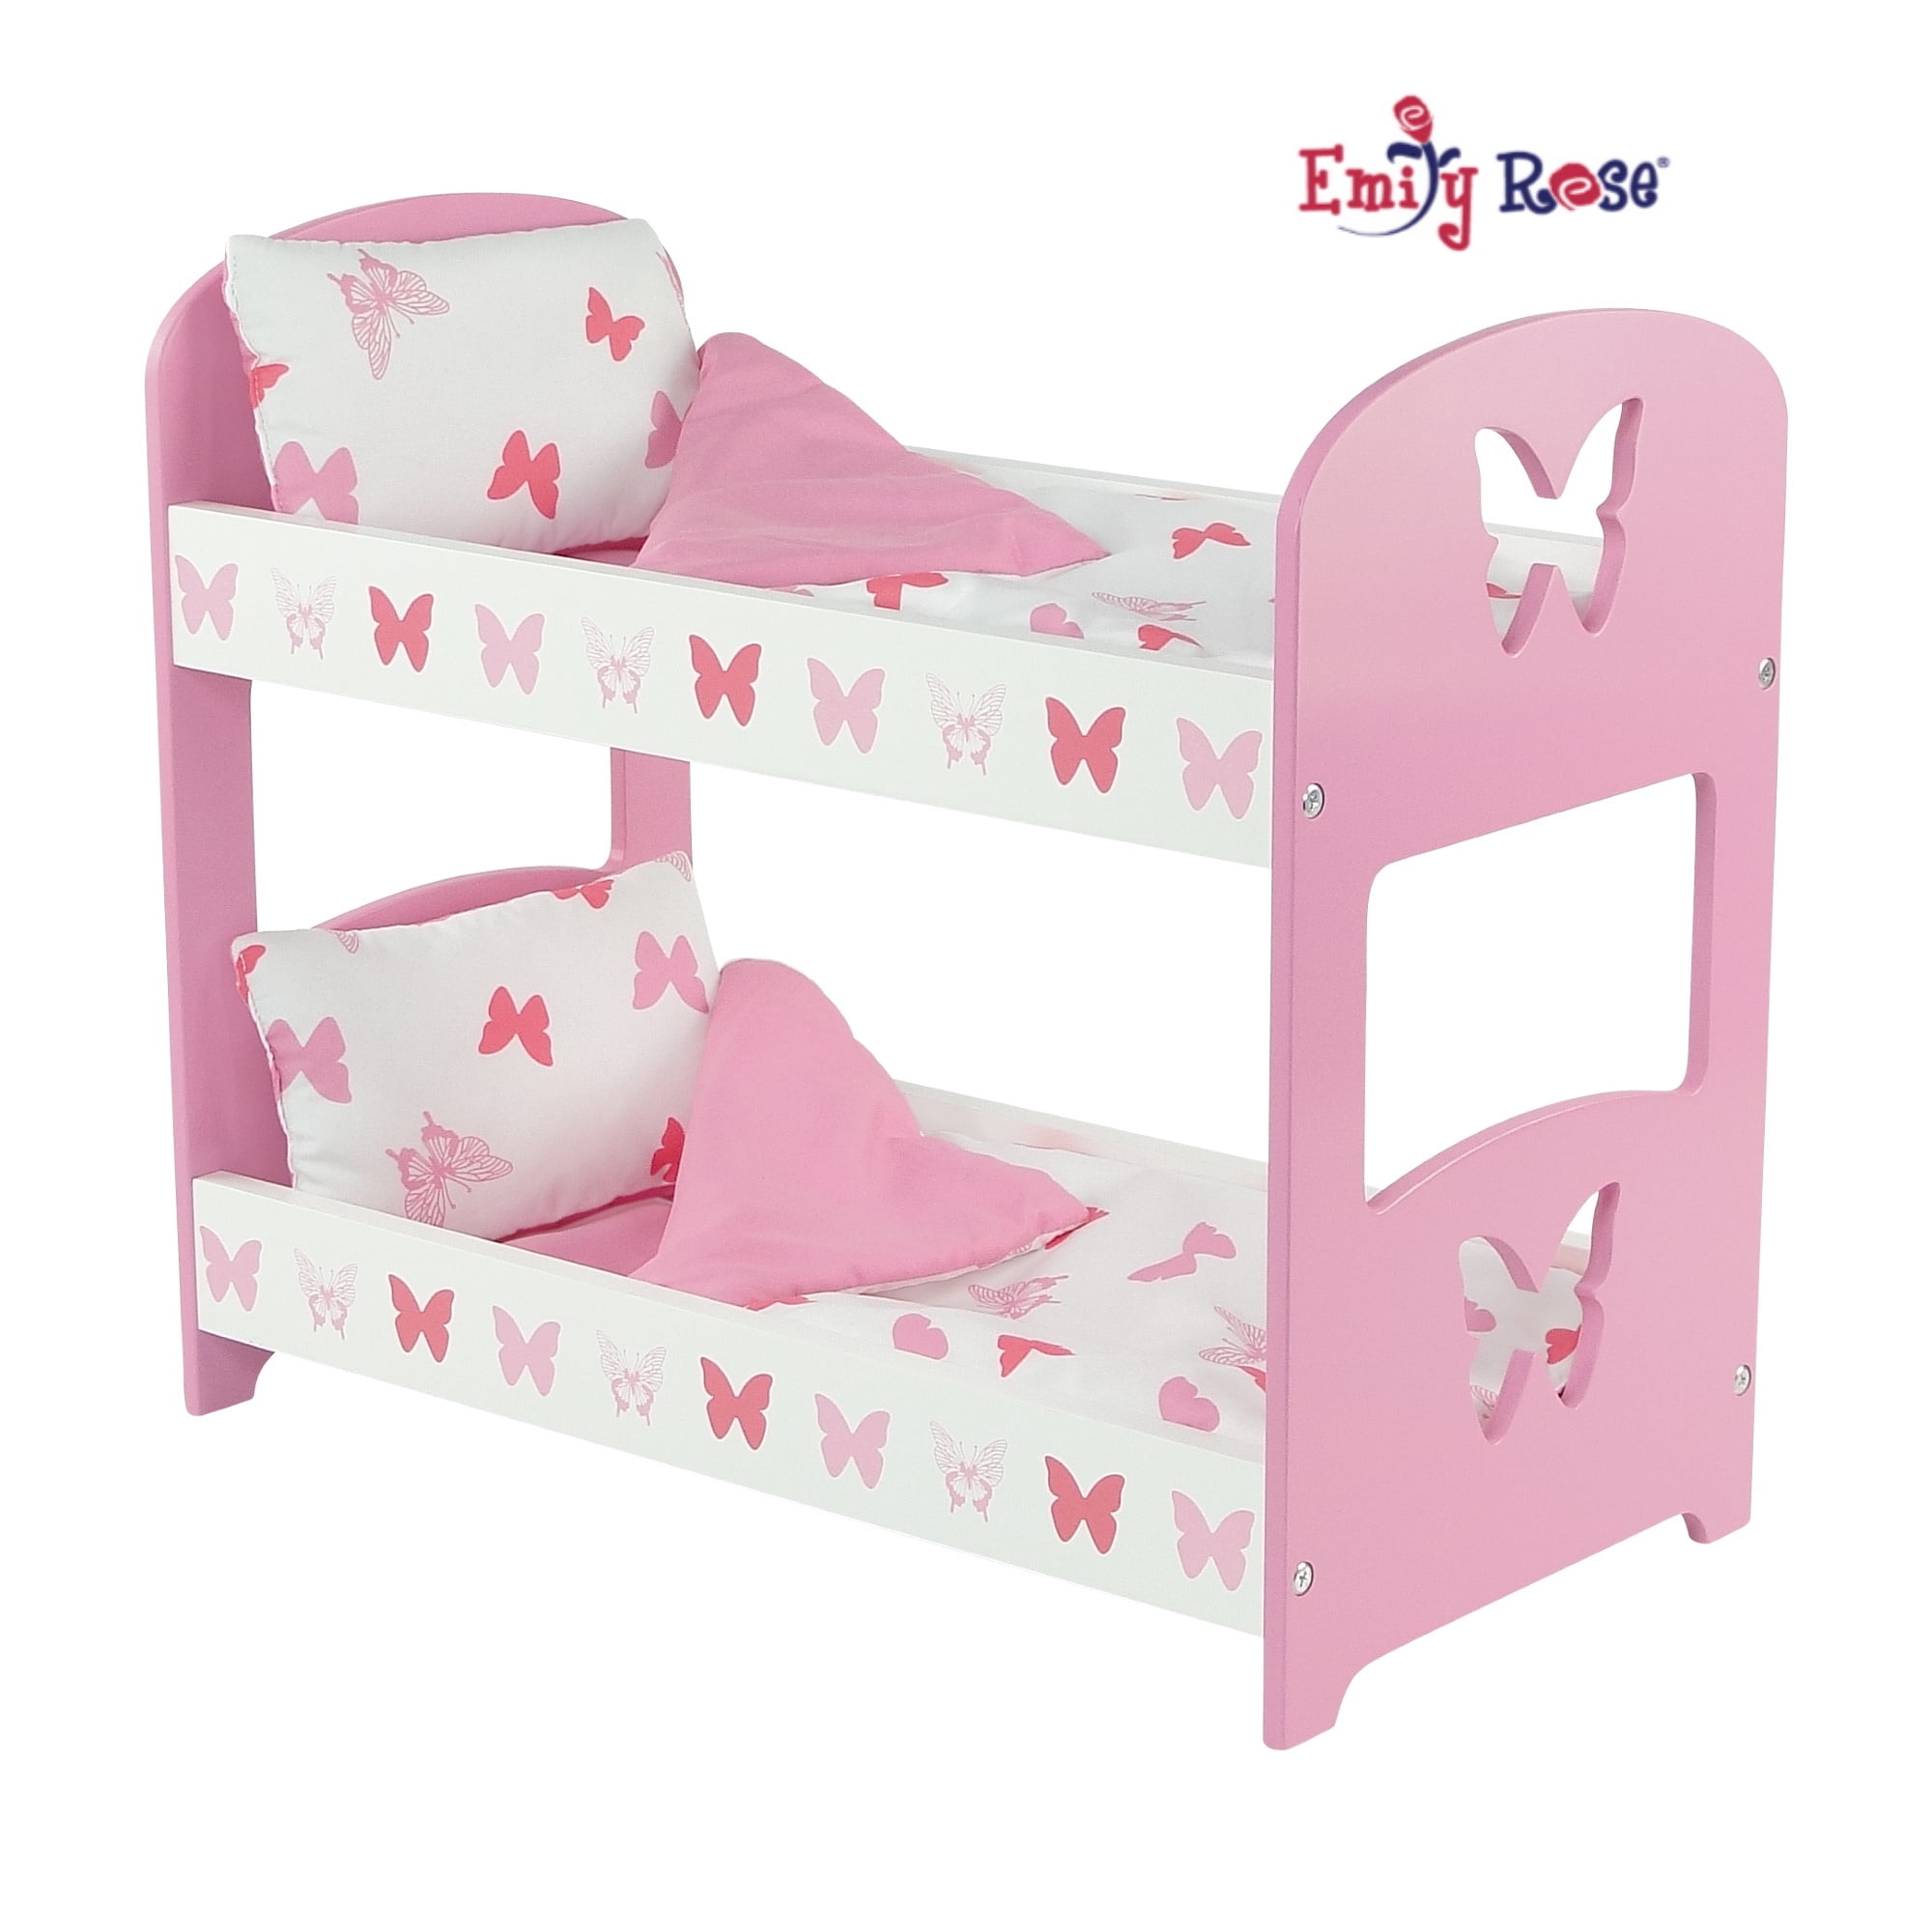 Details about   Doll Bunk Bed W/ Ladder & Bedding Fits 18" Dolls Dollhouse Furniture Girls Toys